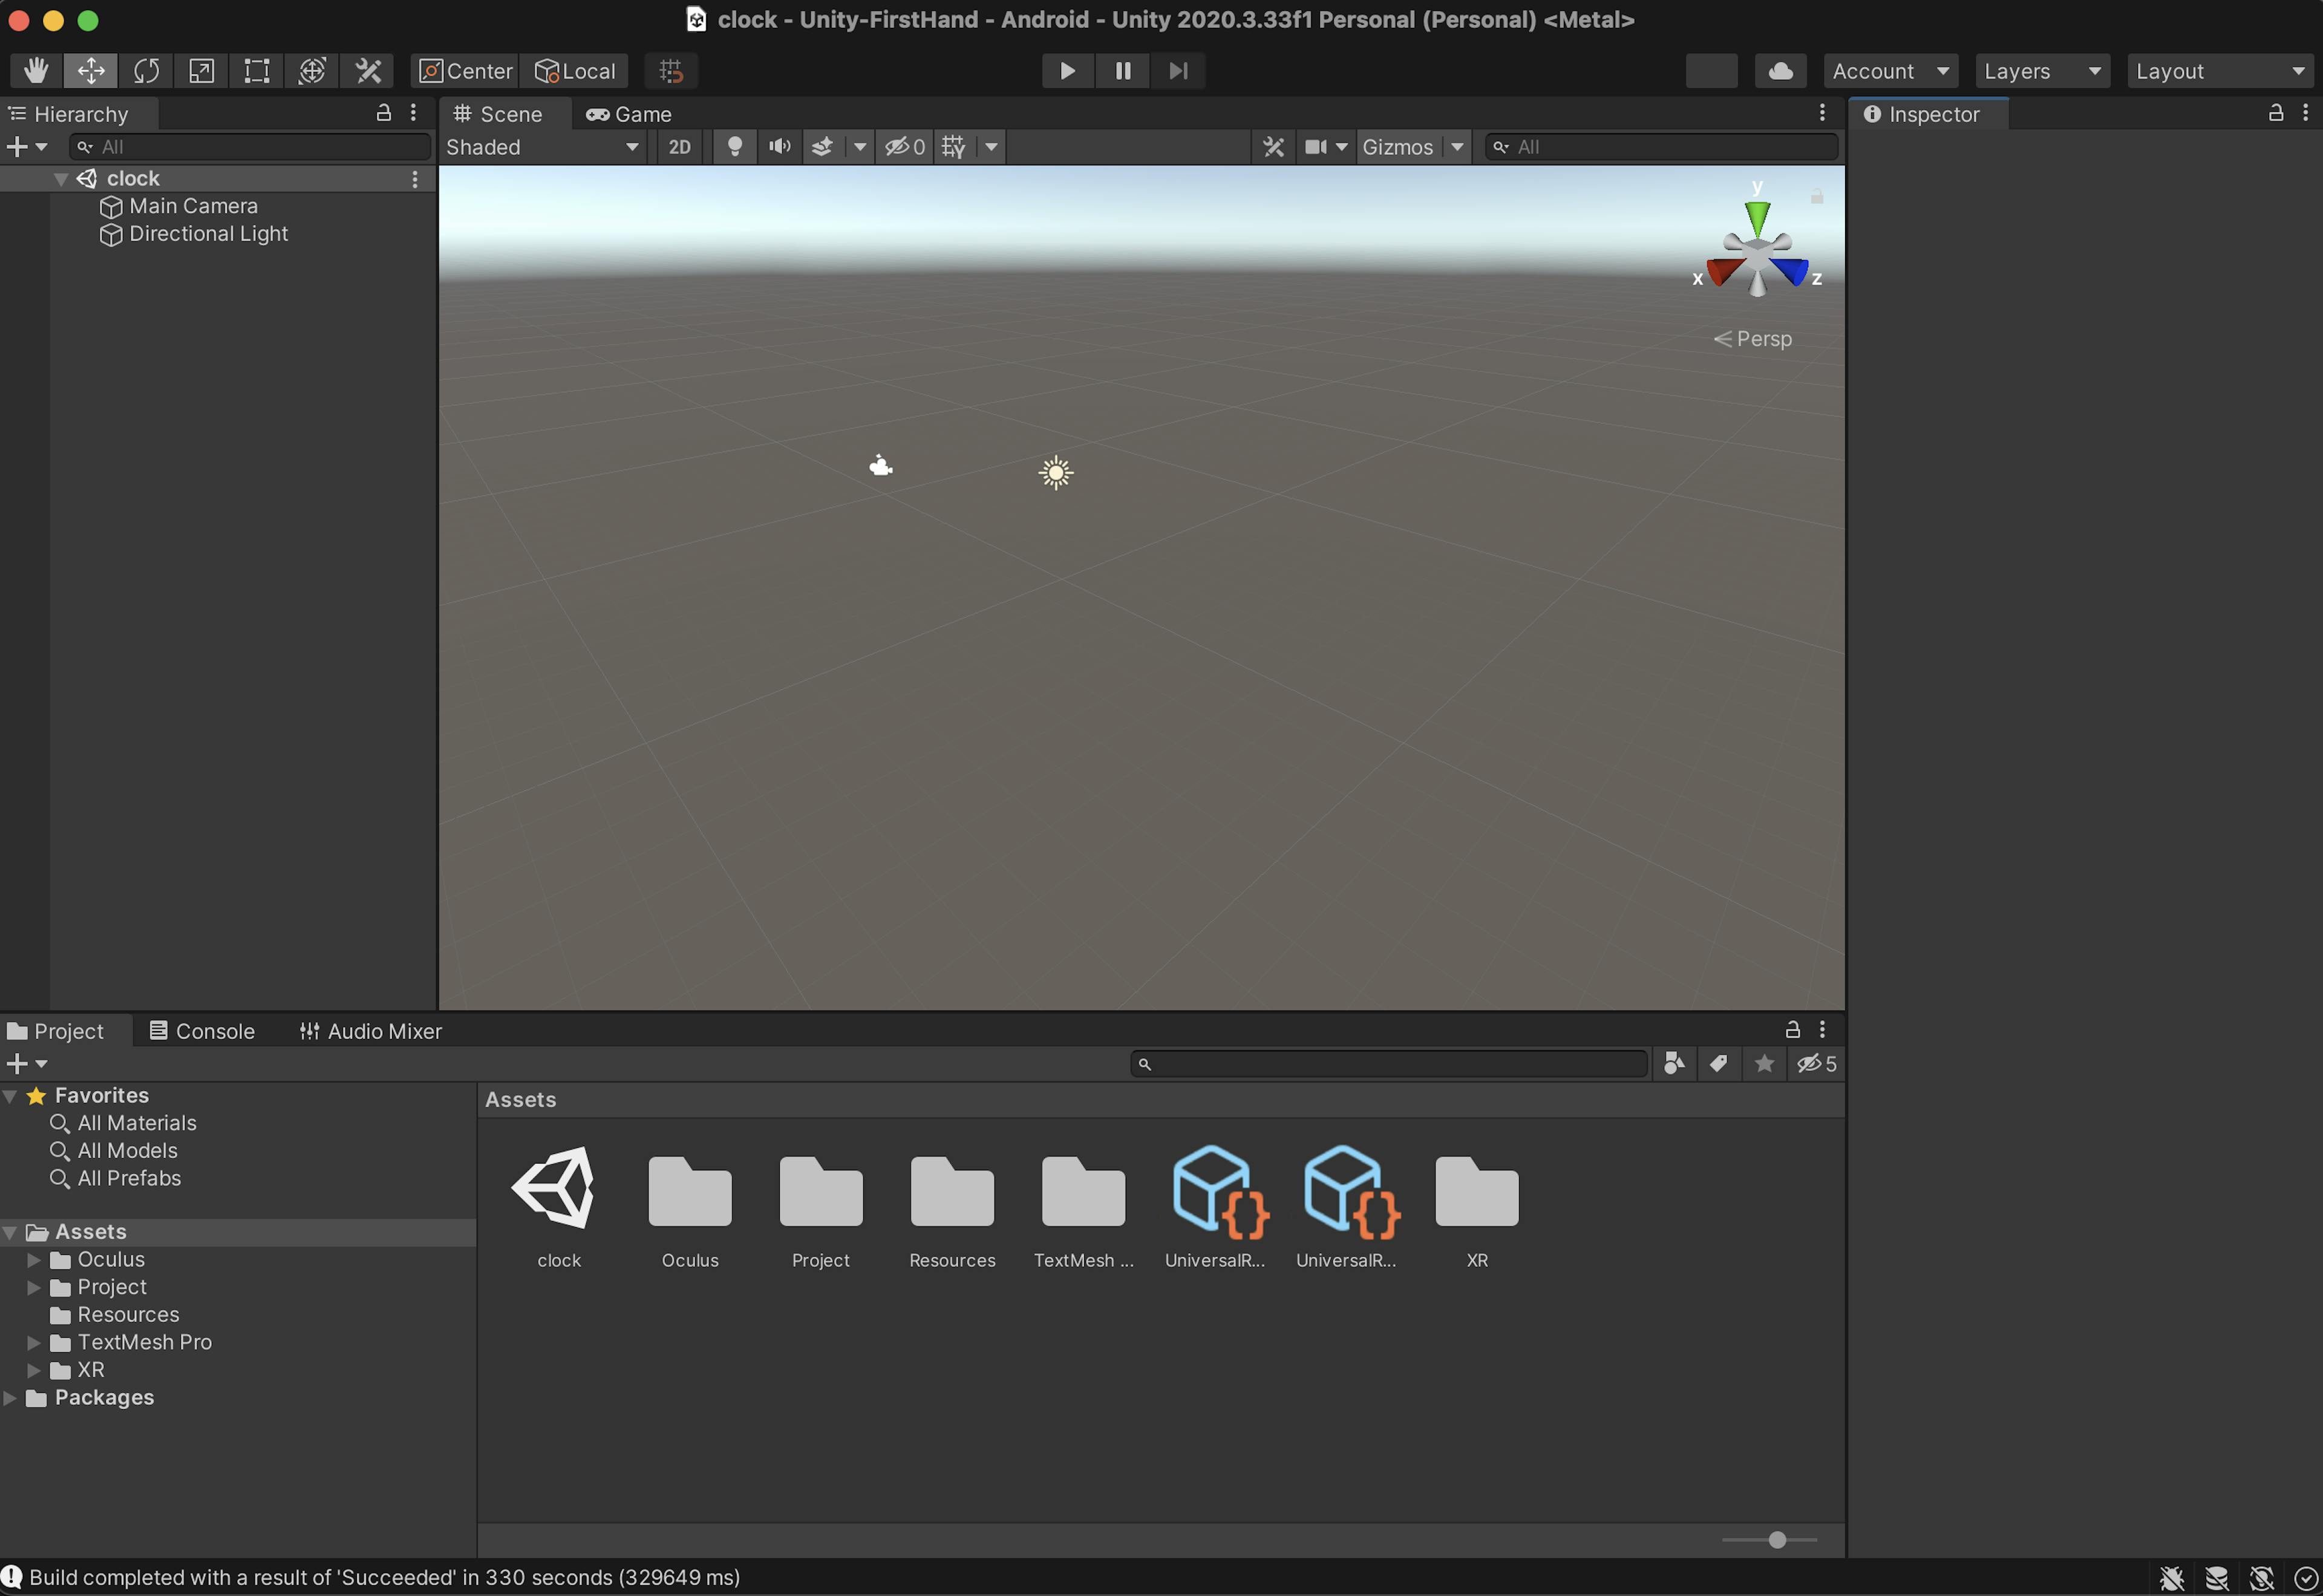 FirstHand in Unity Editor